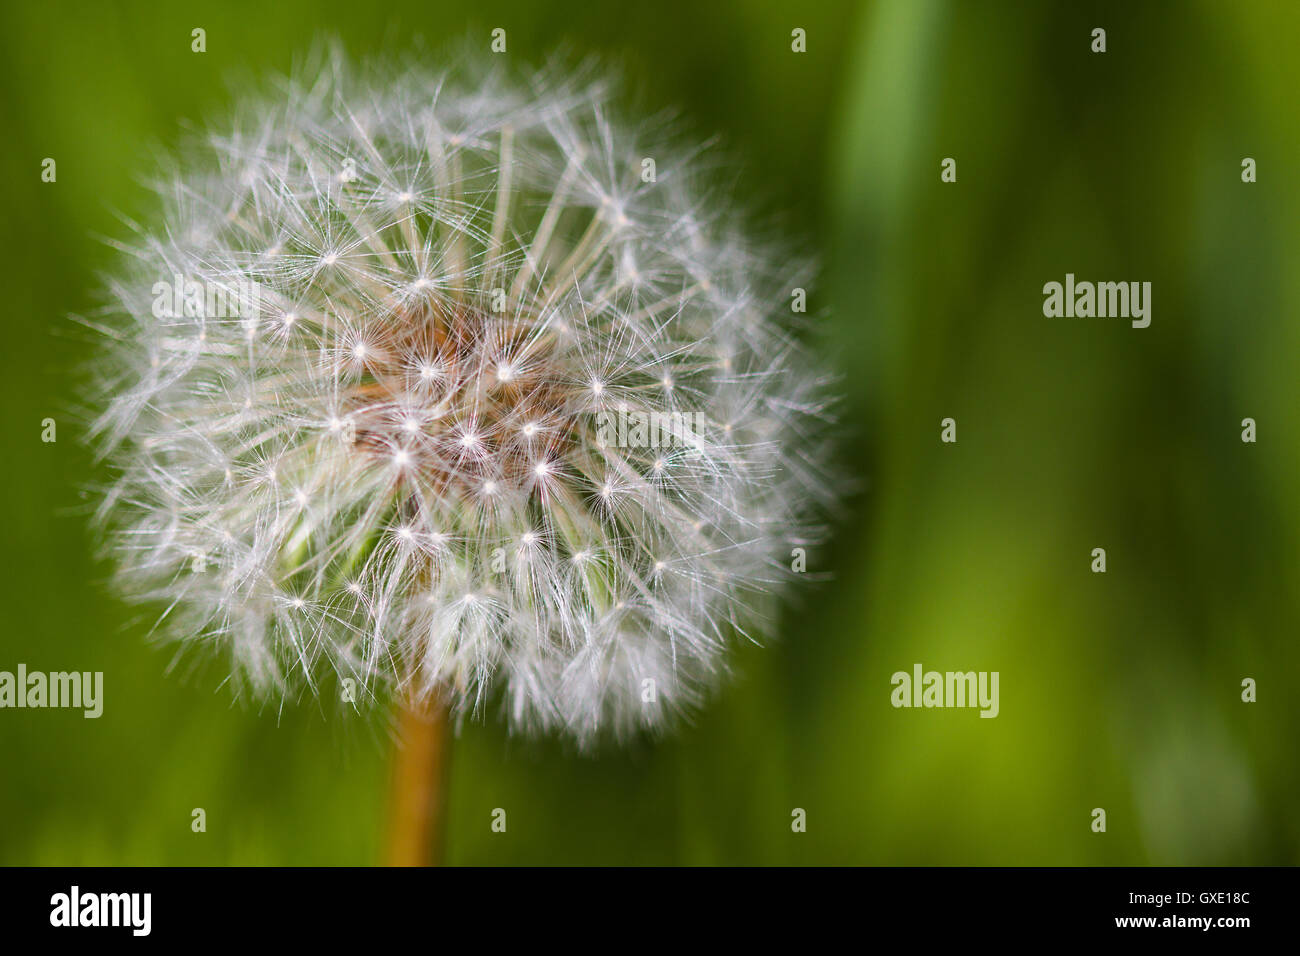 Natural pattern: close up of full dandelion with white seeds and green blured background of plants and grass. Stock Photo